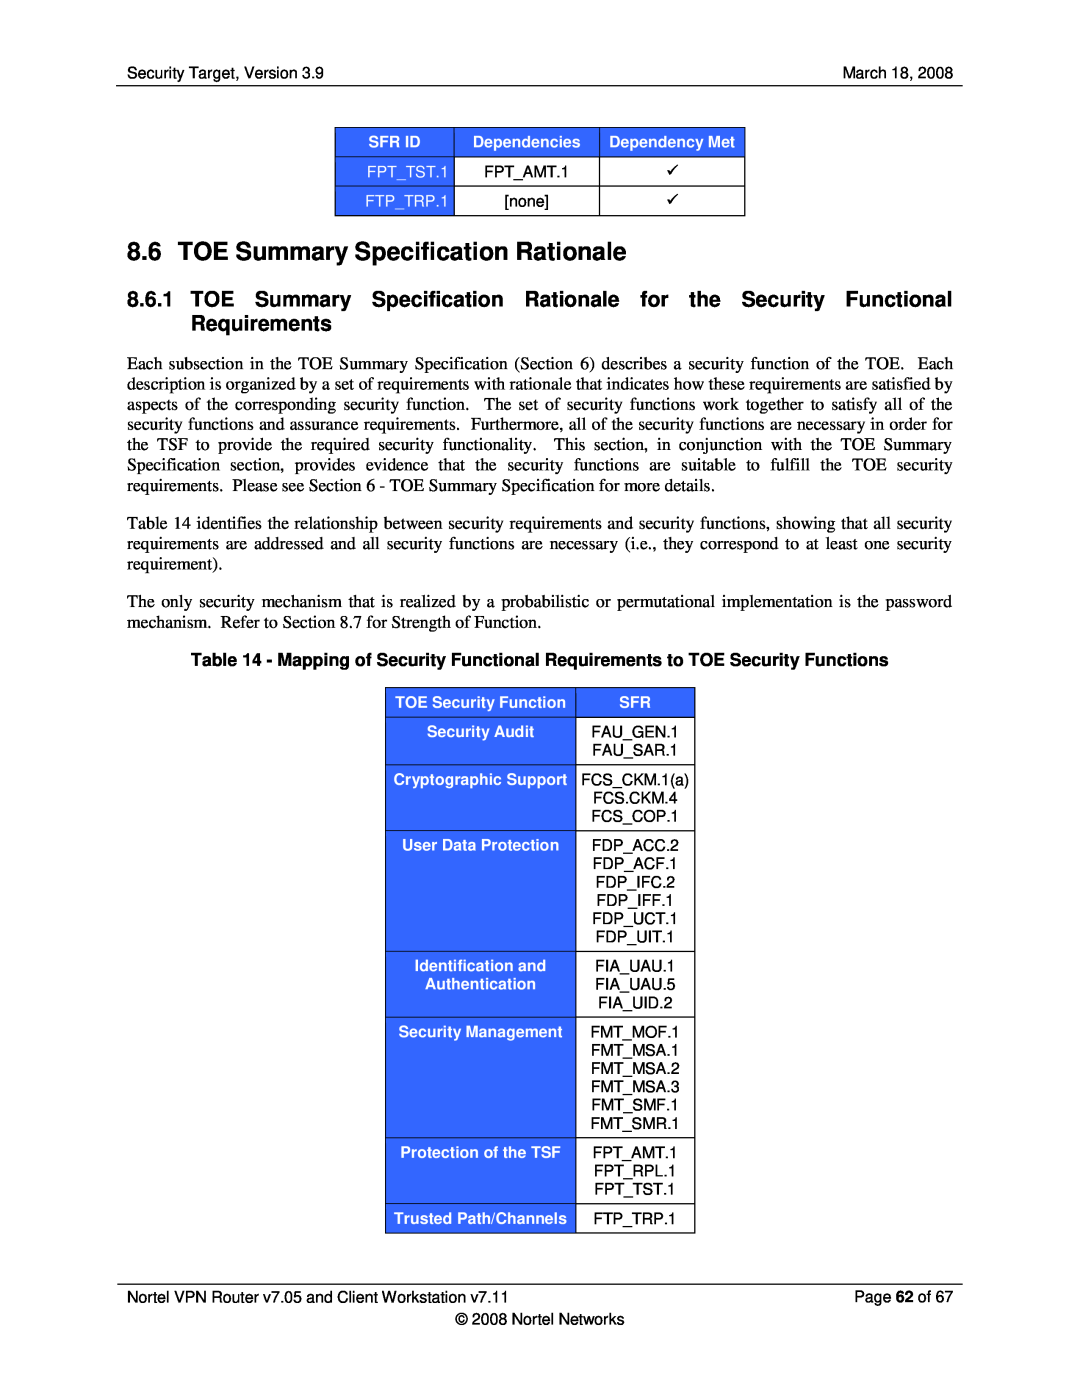 Nortel Networks 7.05, 7.11 manual TOE Summary Specification Rationale, FCSCOP.1, FDPUCT.1 